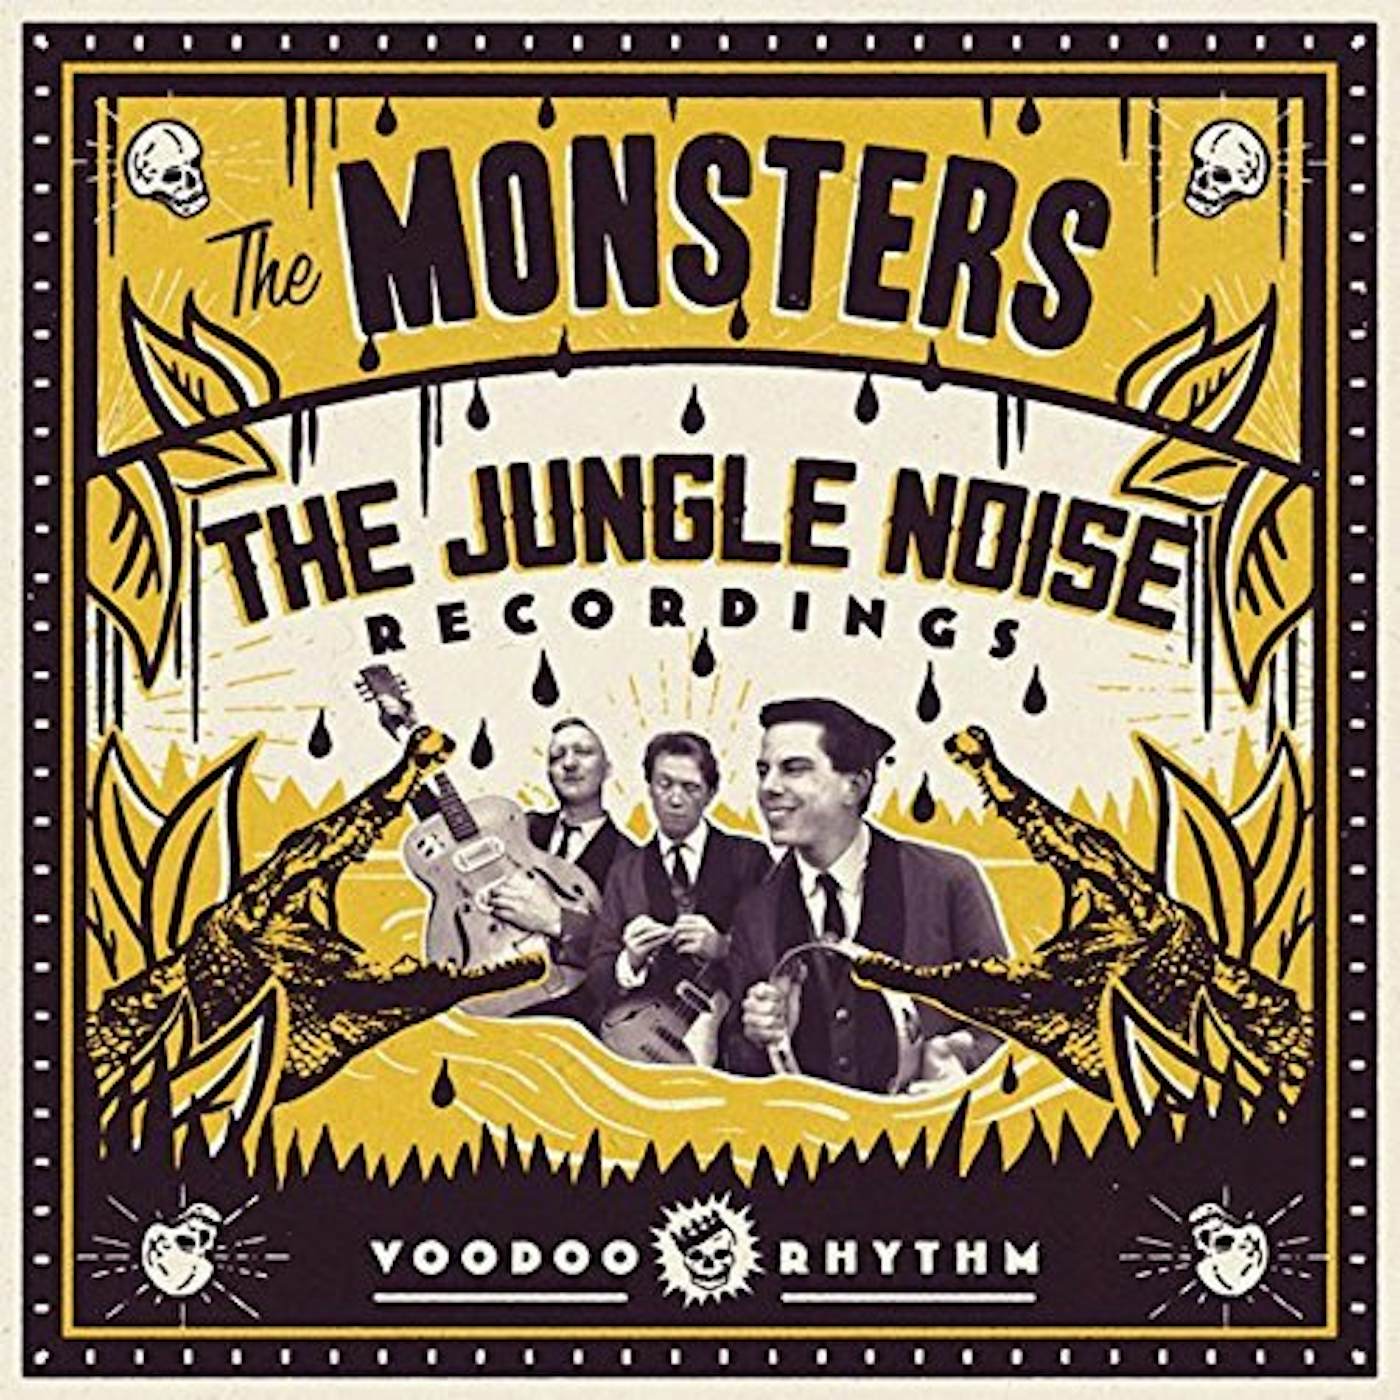 The Monsters JUNGLE NOISE RECORDINGS CD